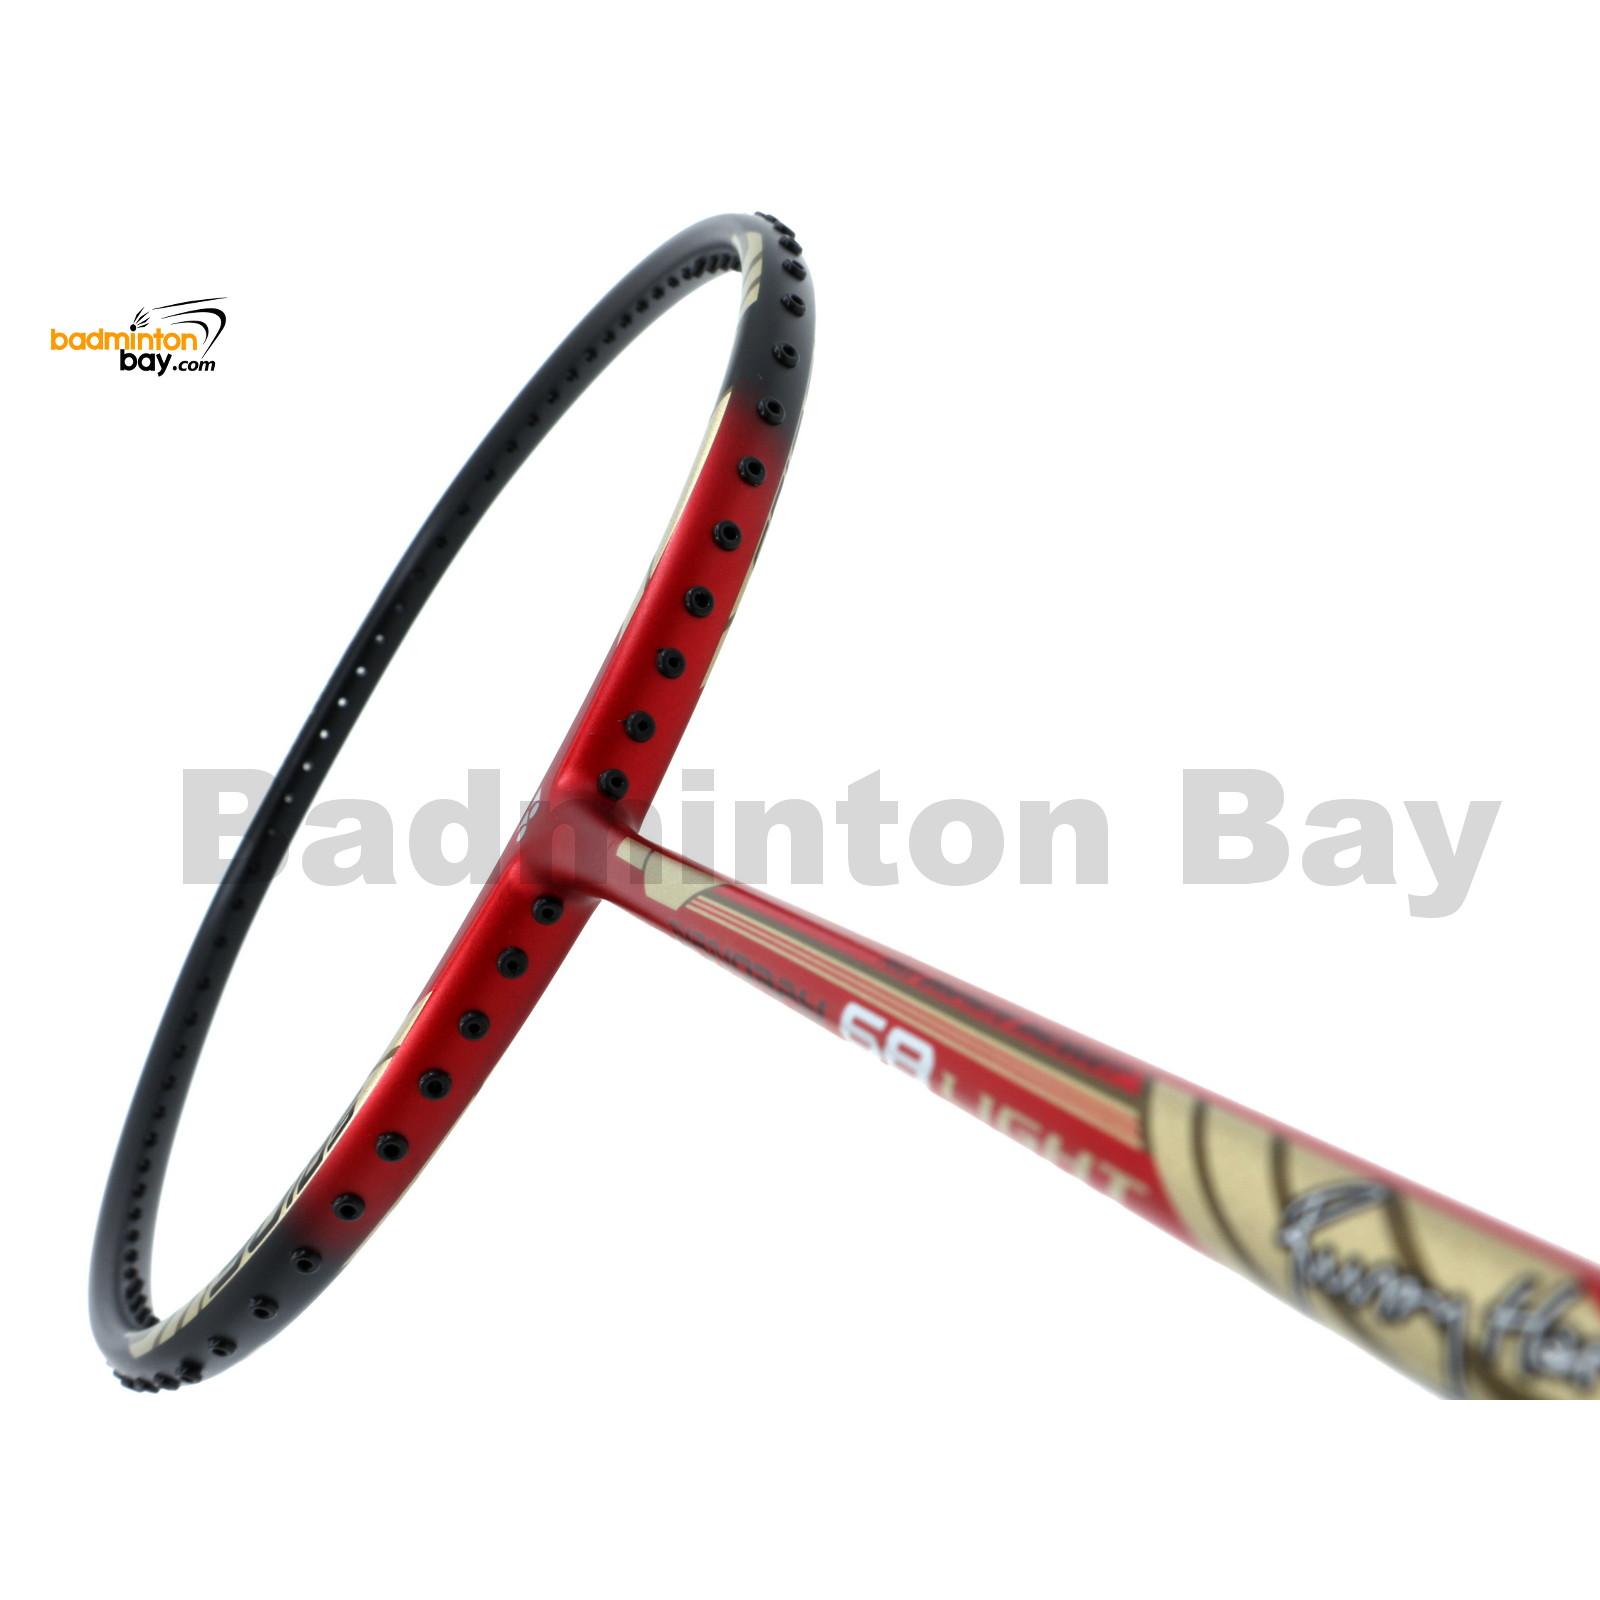 Details about   NANORAY 68 5UG5 Max Light Badminton Racket With String Racket Grip FREE SHIPPING 